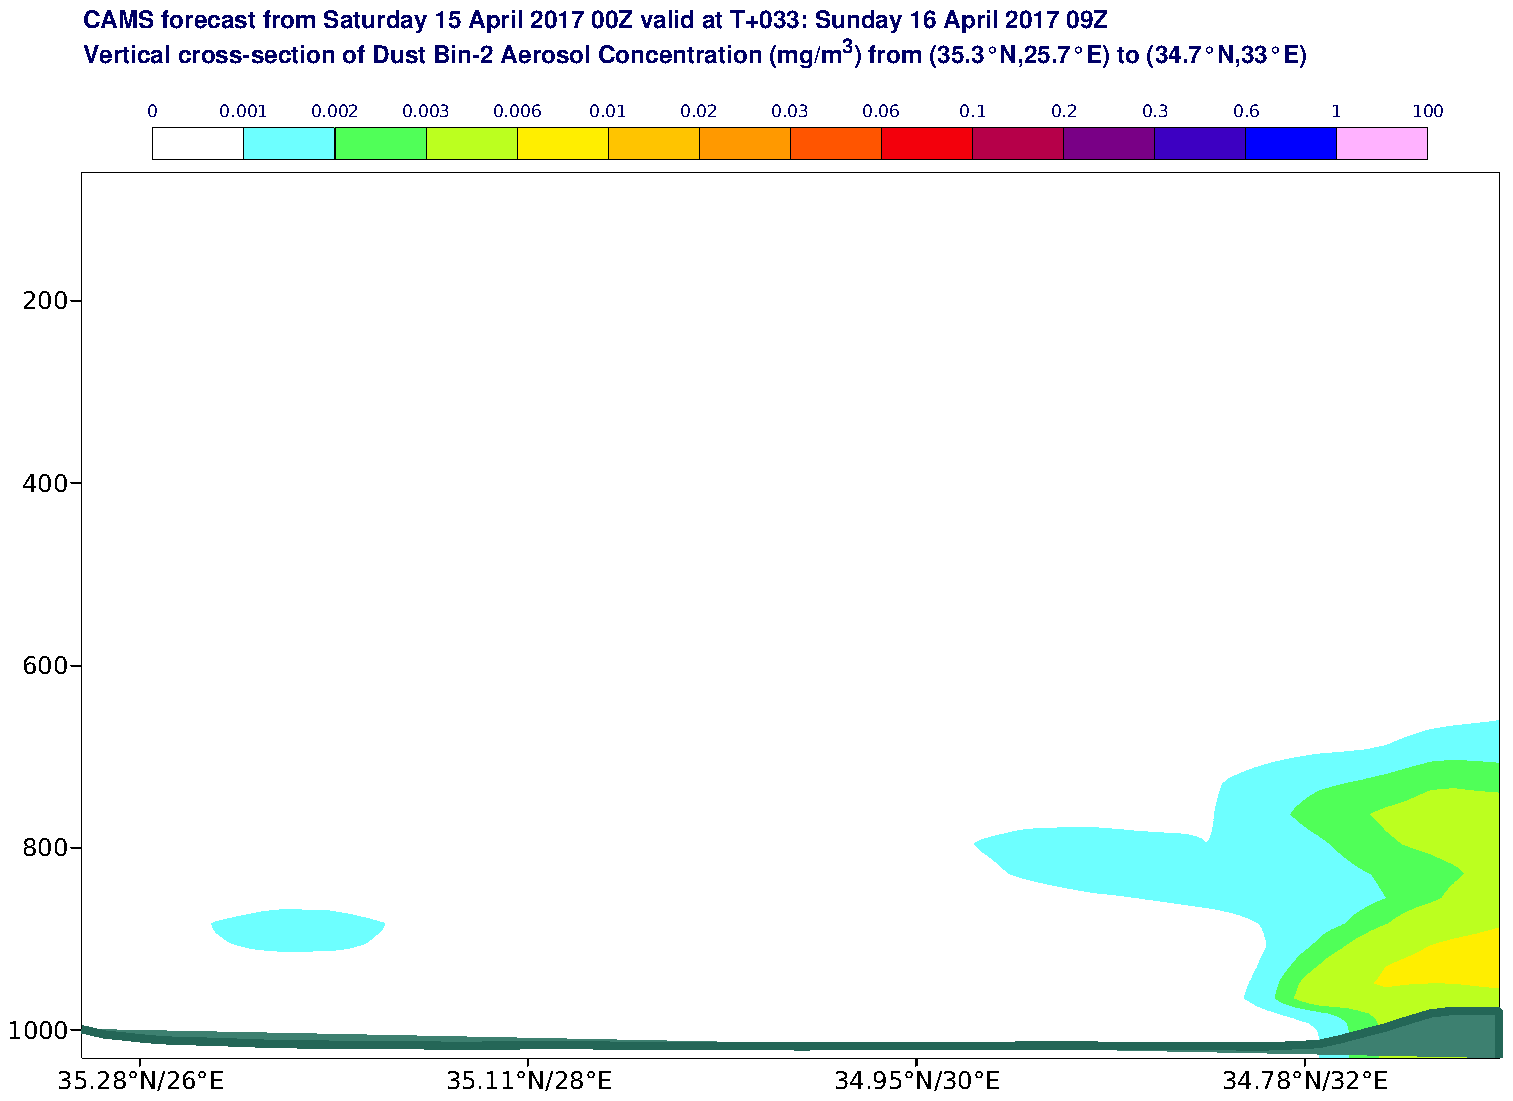 Vertical cross-section of Dust Bin-2 Aerosol Concentration (mg/m3) valid at T33 - 2017-04-16 09:00